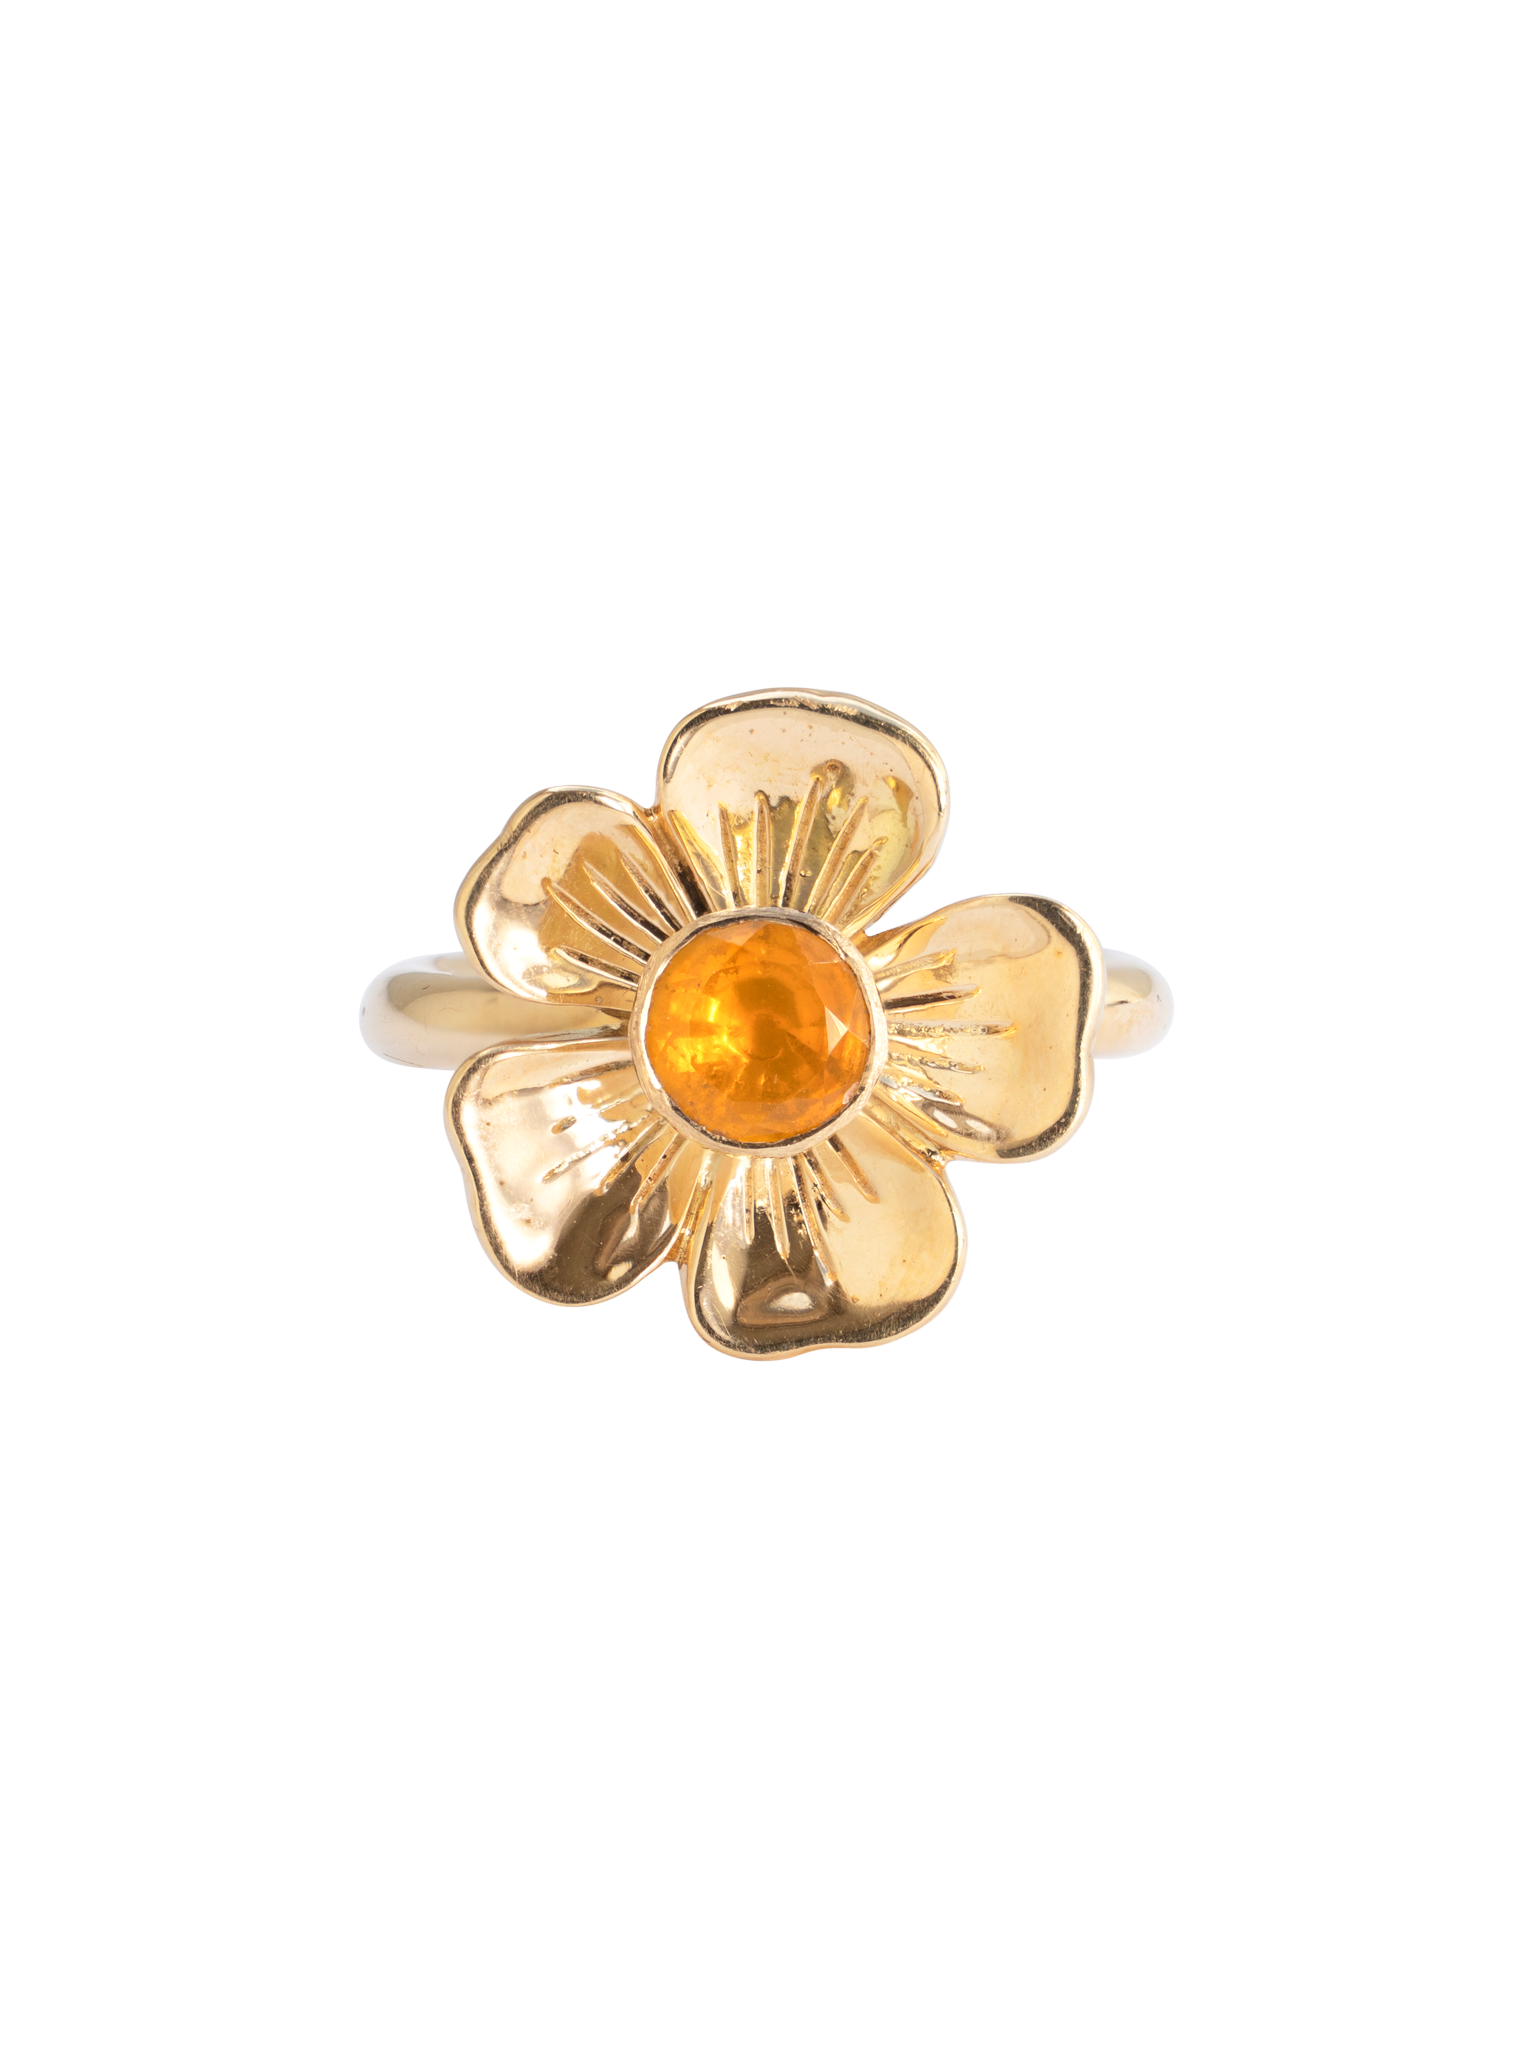 Small flower gold fire opal ring